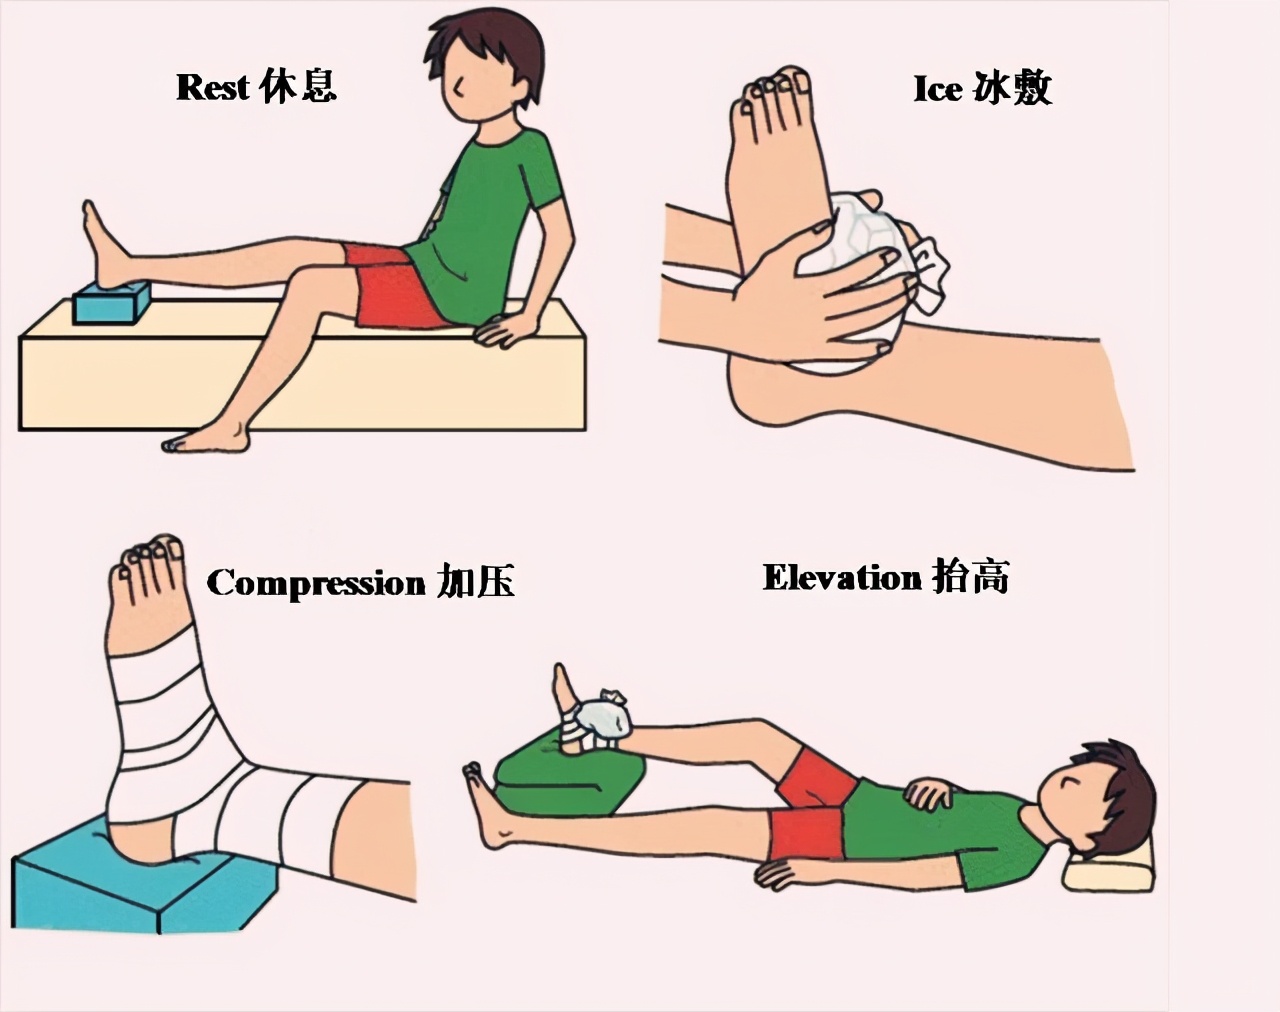 West 1 Physiotherapy and Pilates - Ankle sprain treatment tips from  @physiotherapy_19 Treatment:- try the “RICE” method to ease your symptoms.  RICE stands for “rest, ice, compress, and elevate.” Here's how it